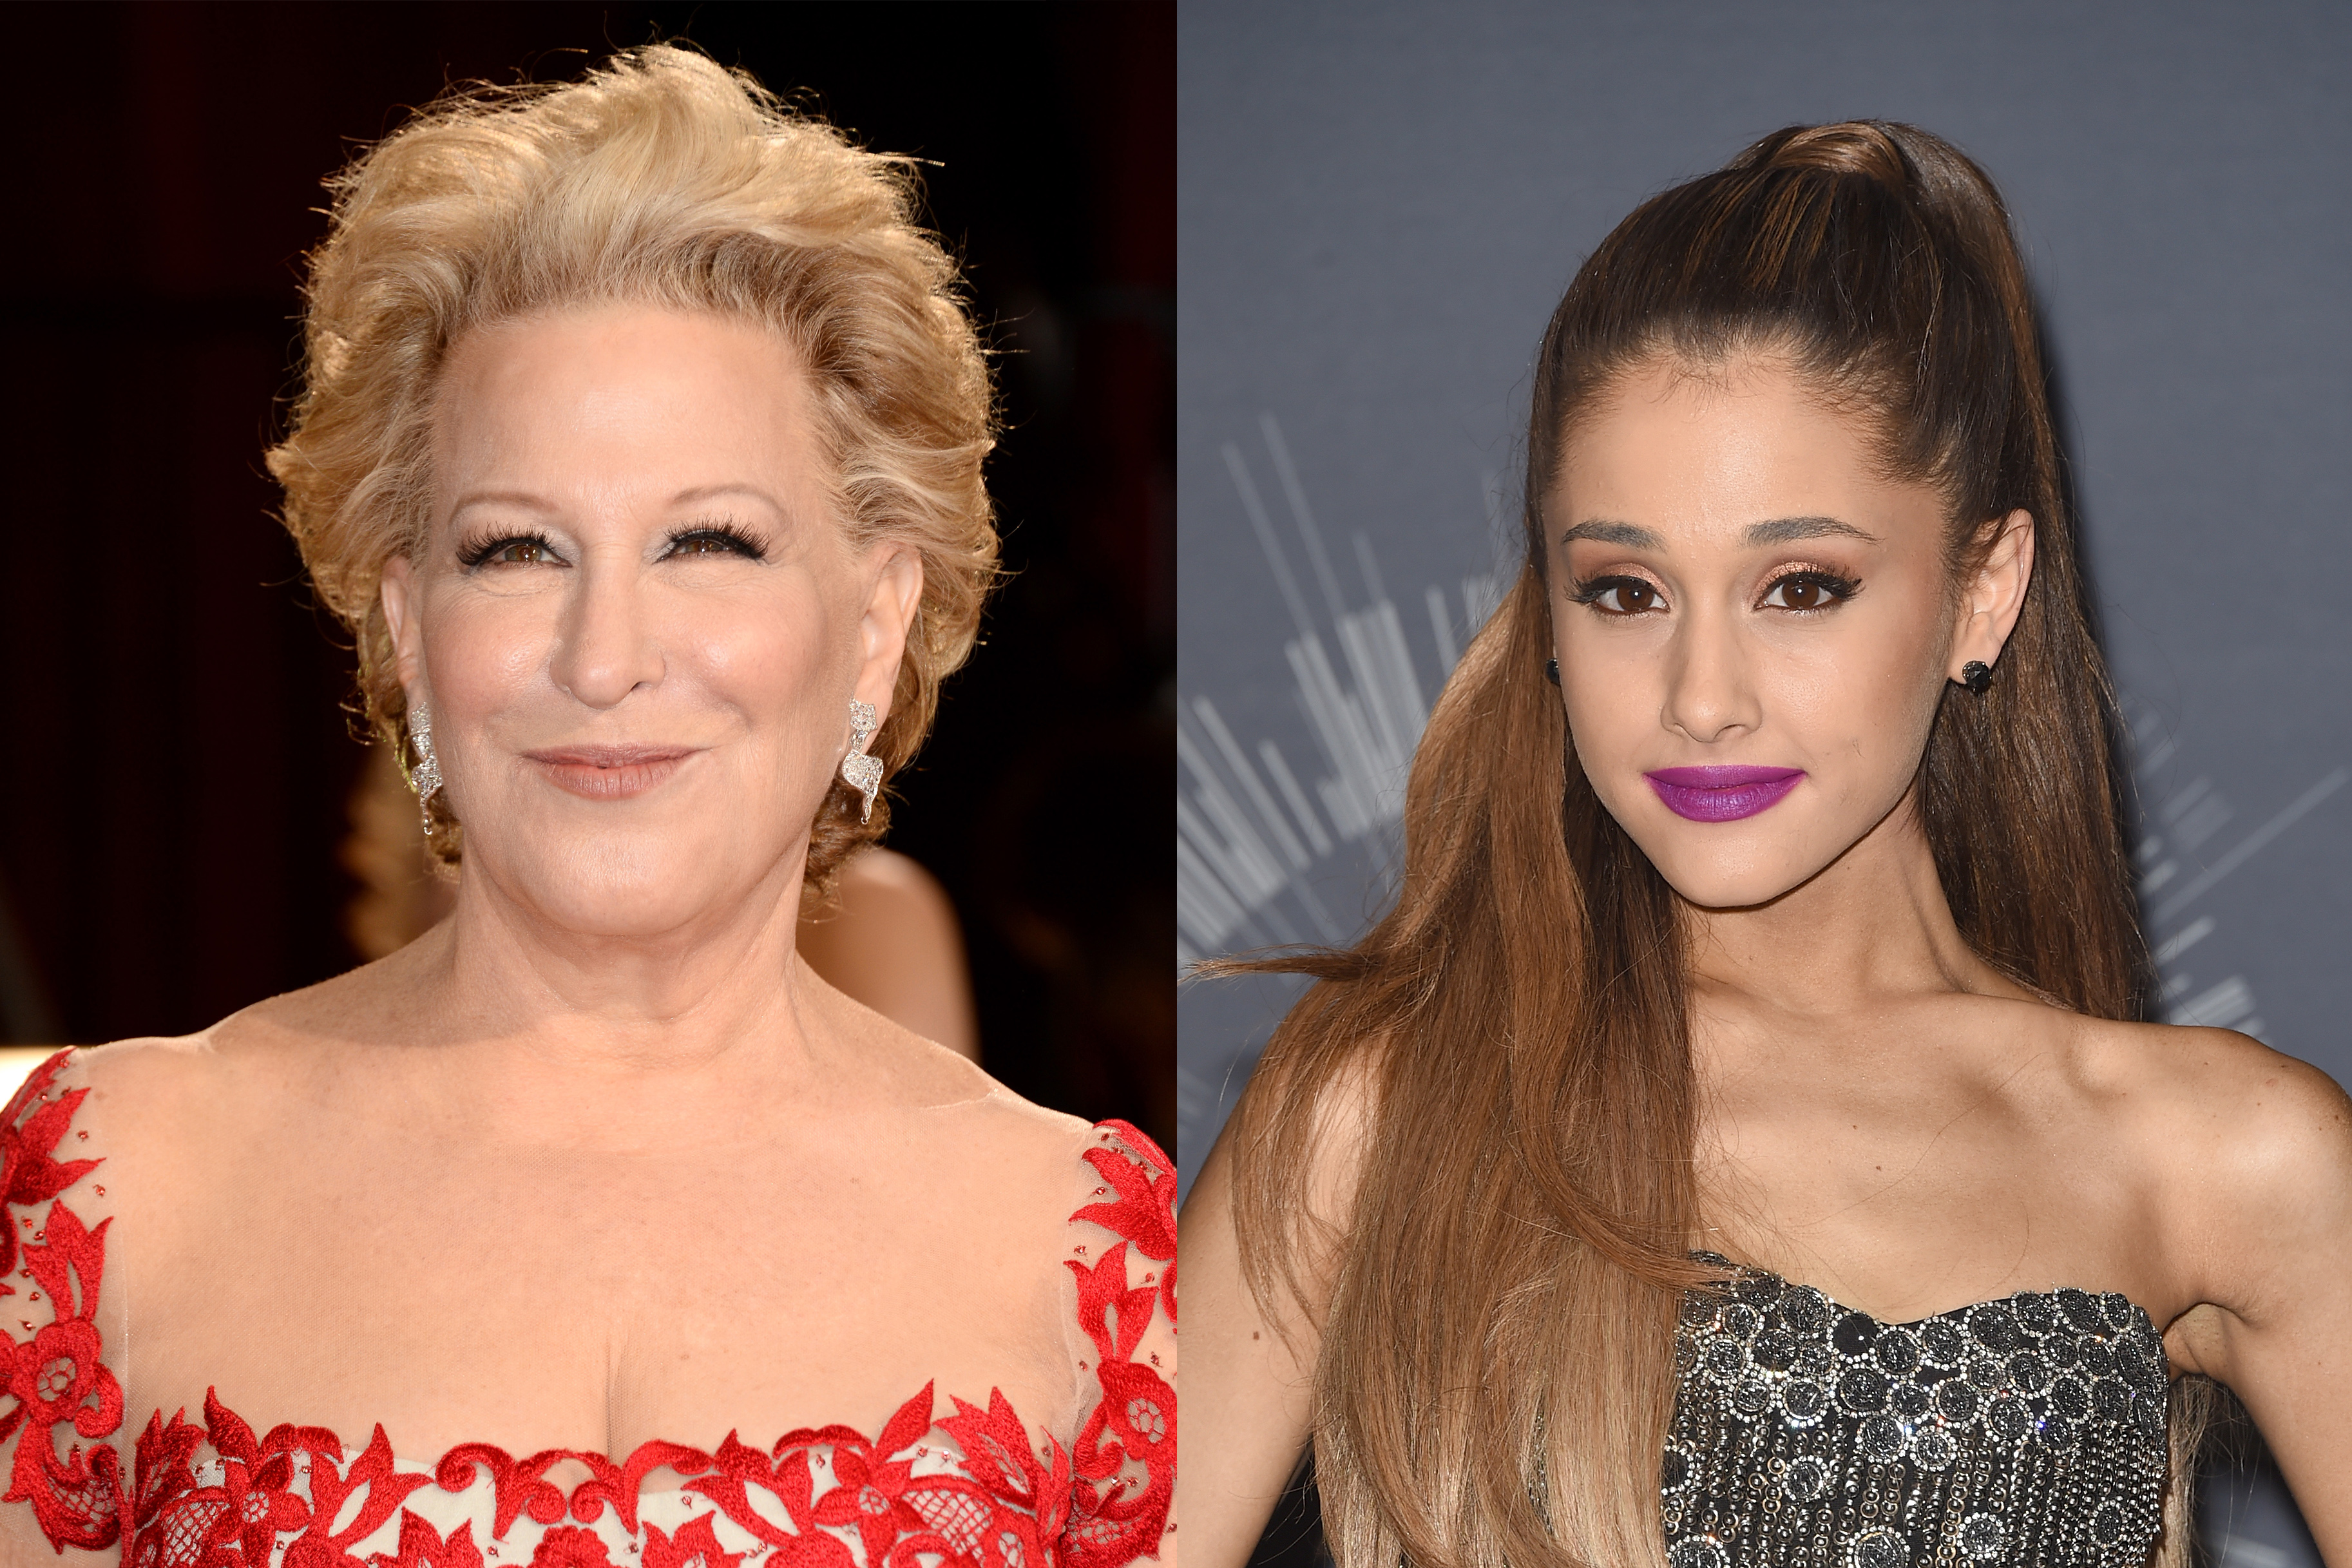 Ariana Grande Naked Having Sex - Bette Midler (Kind of) Apologizes for Calling Ariana Grande a 'Whore' | Time